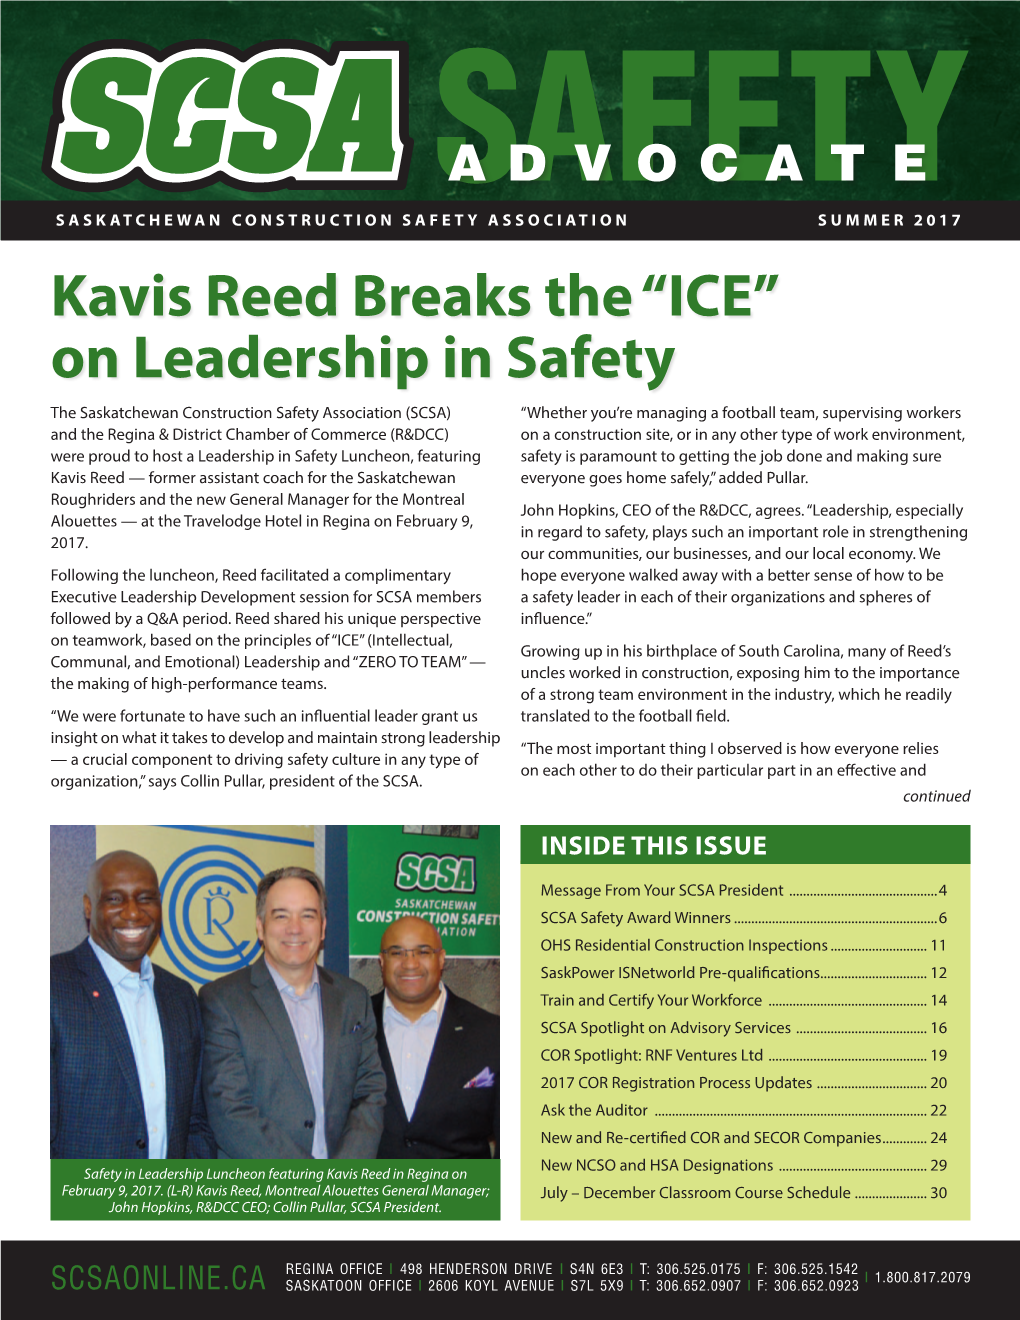 Kavis Reed Breaks the “ICE” on Leadership in Safety